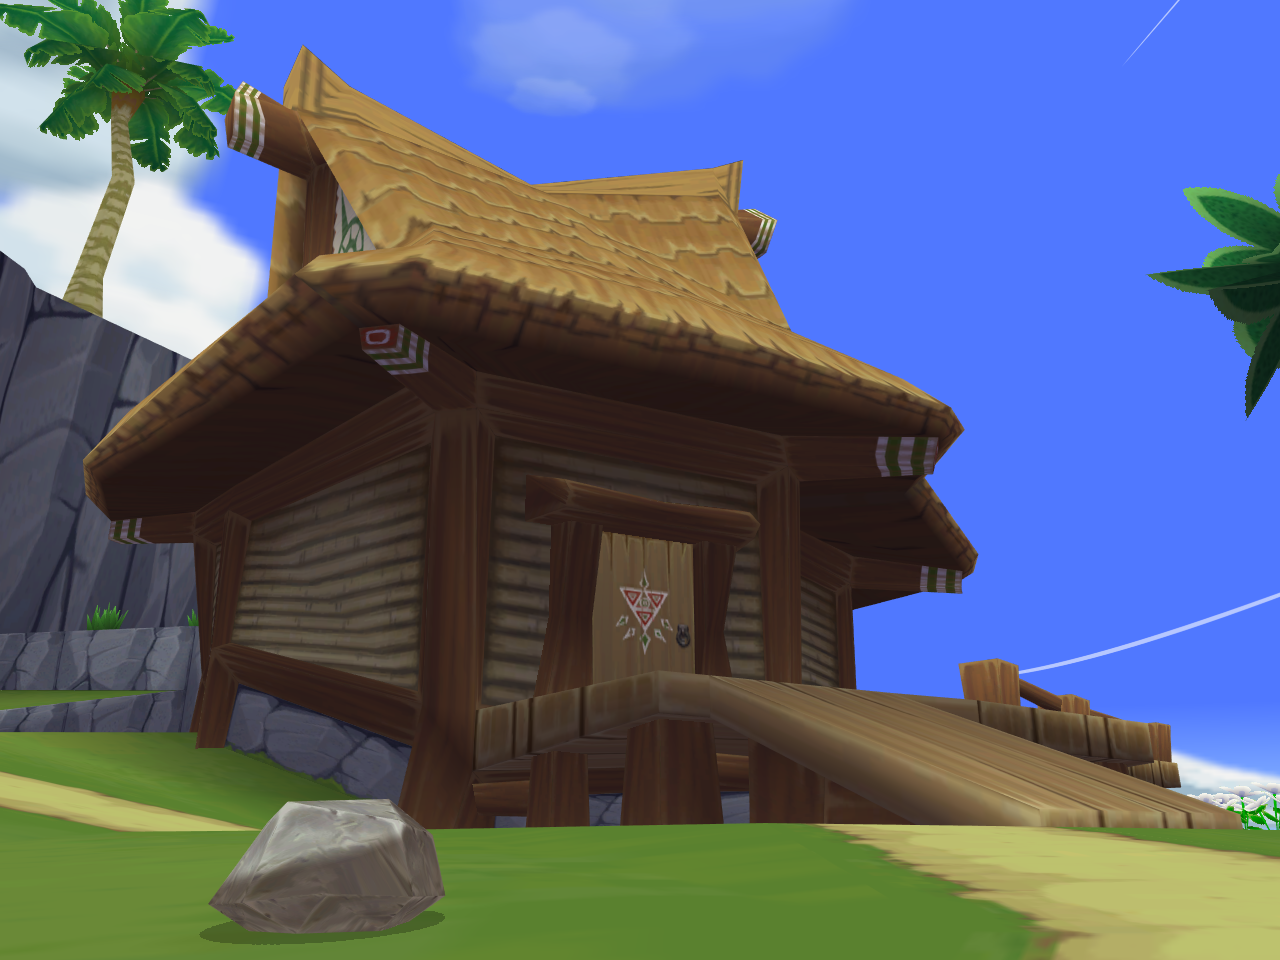 Link%27s_House_%28The_Wind_Waker%29.png